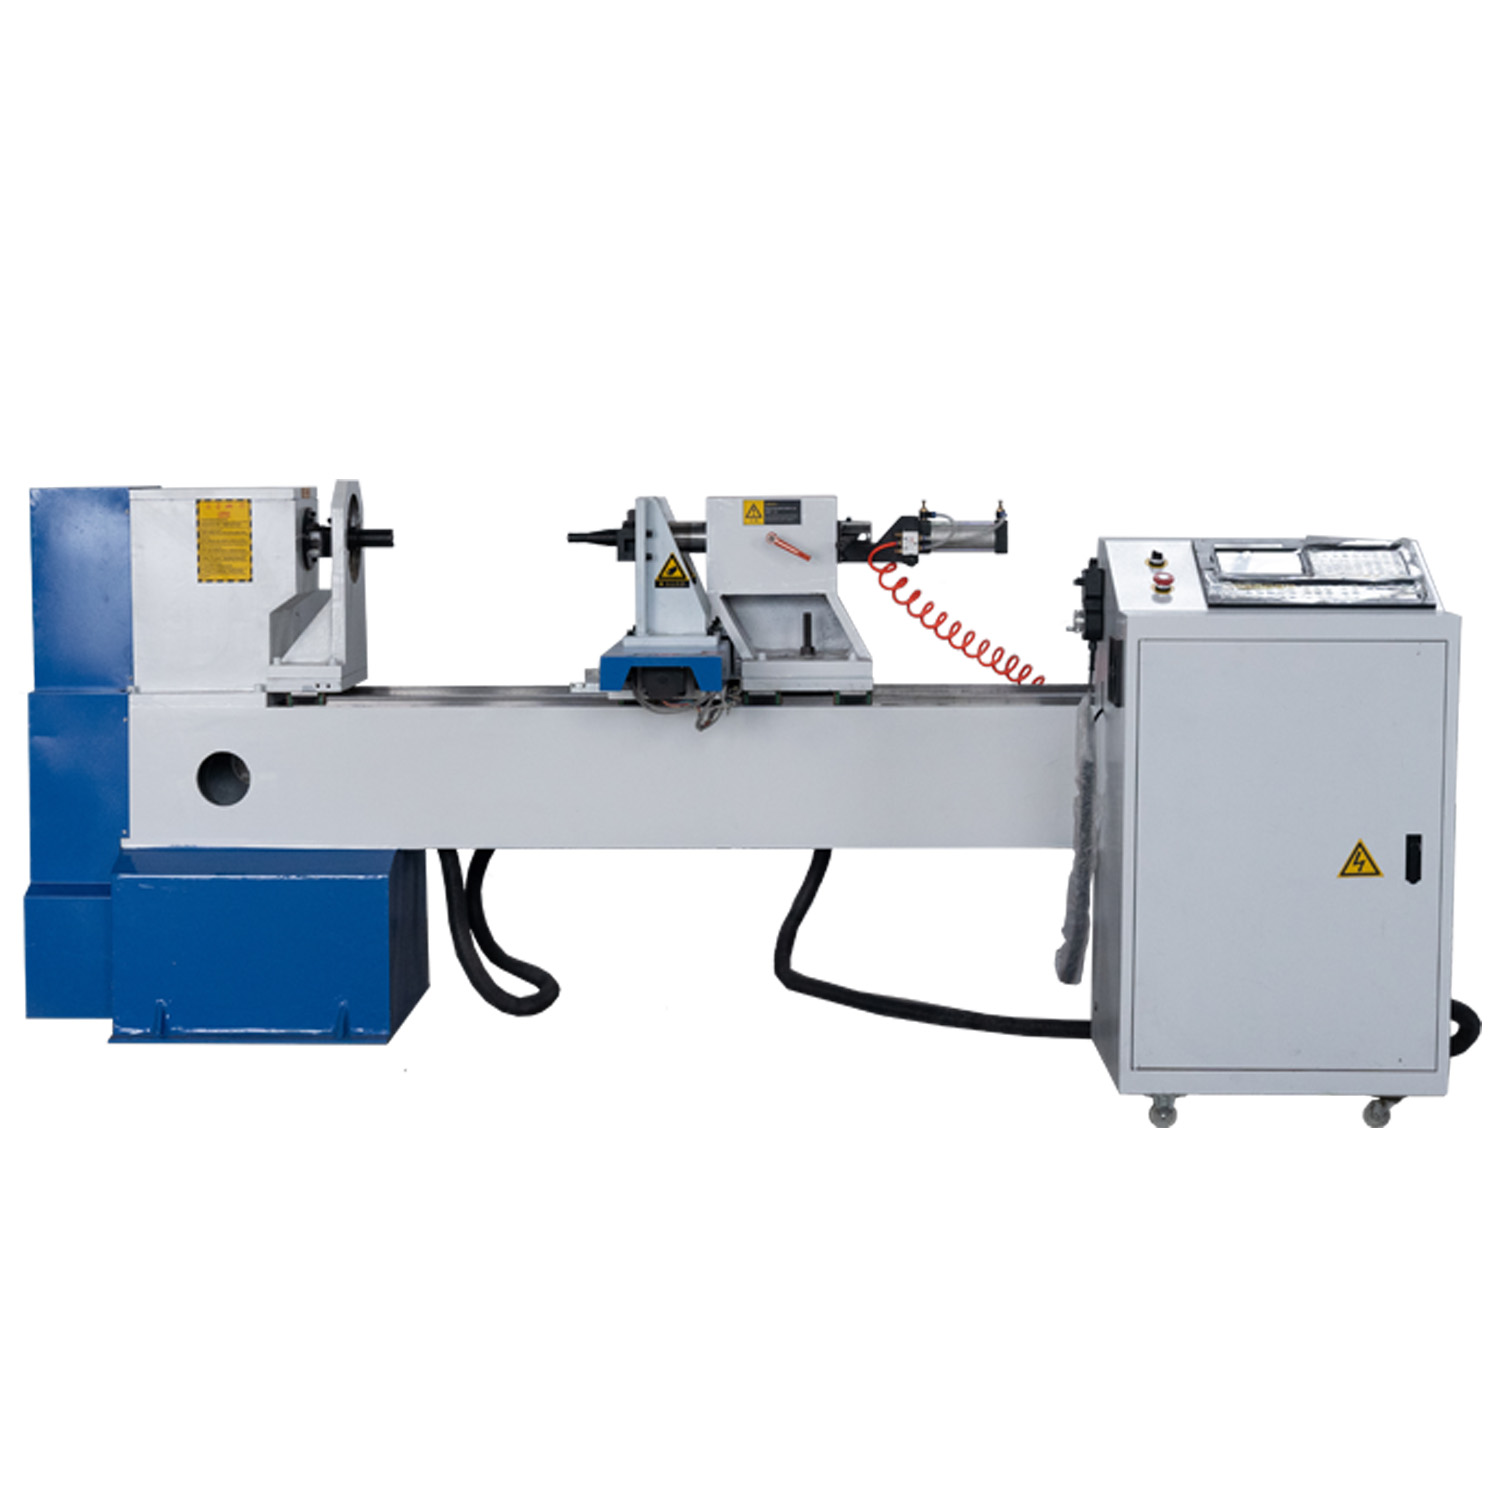 In the next decade, the wood lathe machine market will also usher in a great growth